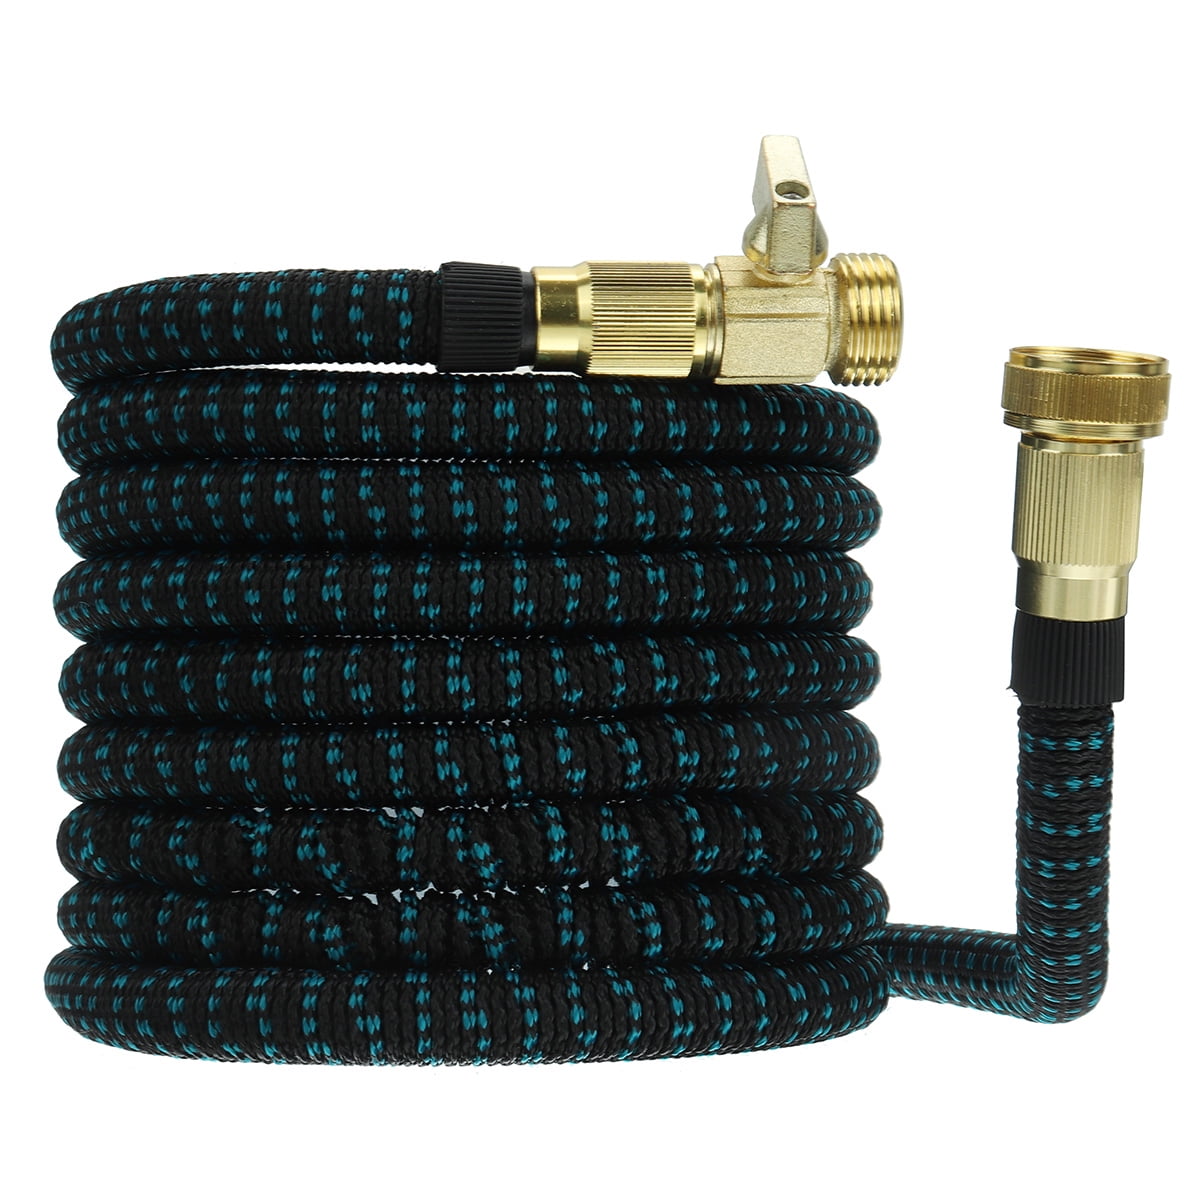 Heavy Duty Expandable Hose 25,50,75,100 feet With All Brass Connectors Sack 